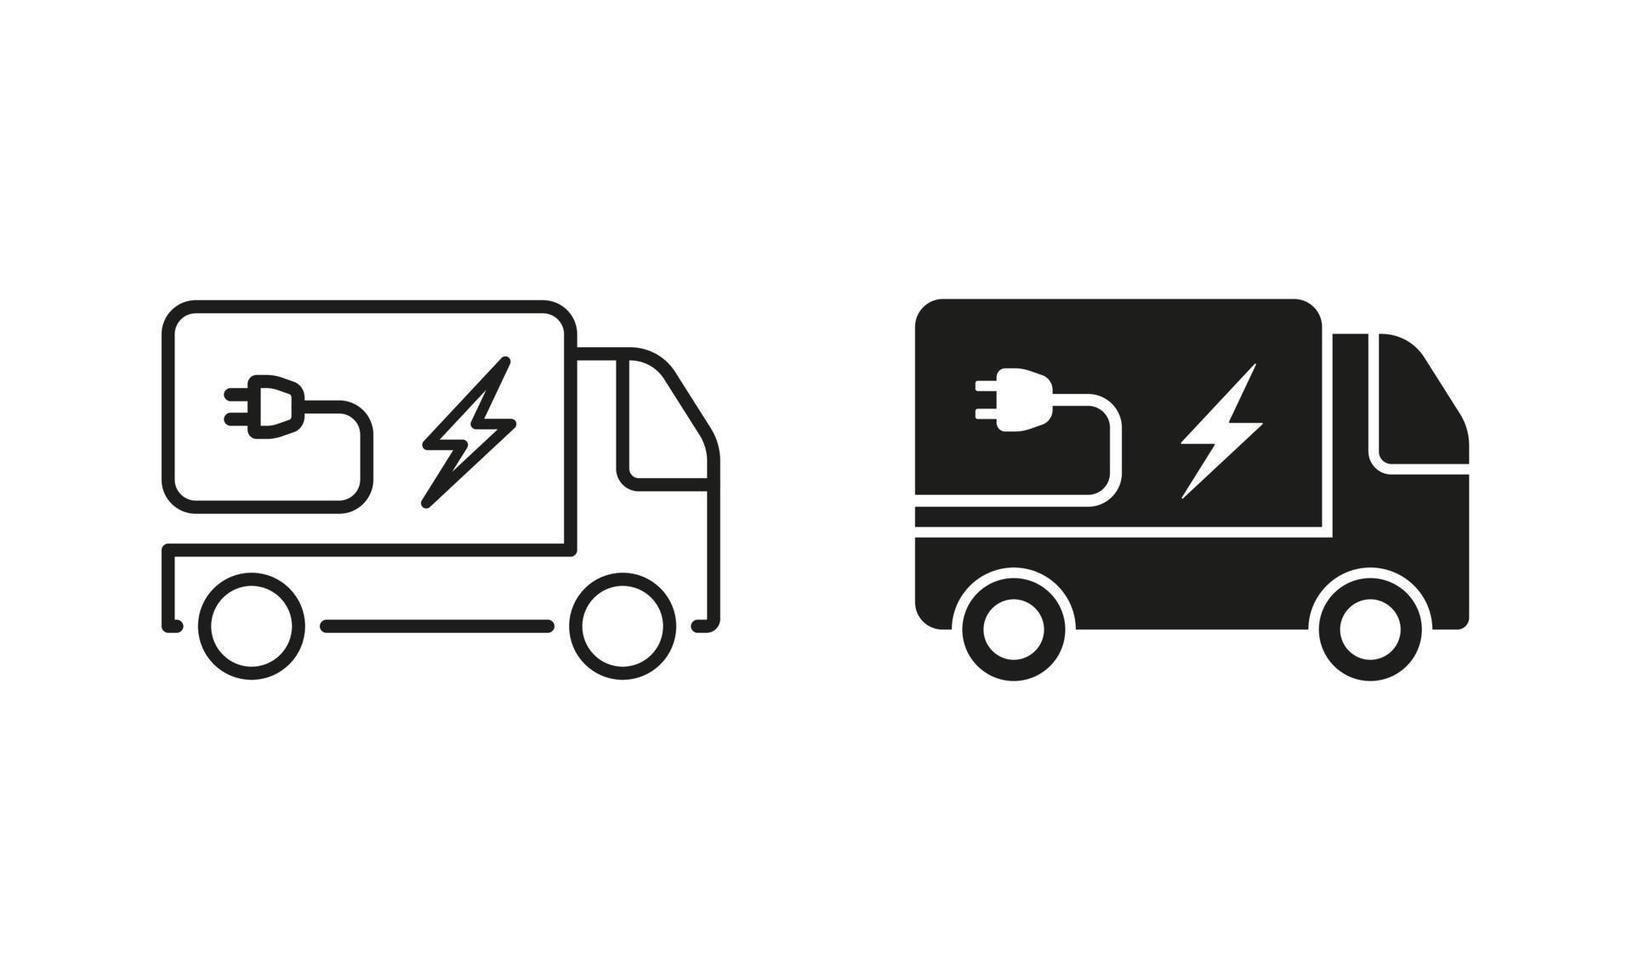 Vehicle Transport with Eco Green Electricity Power Line and Silhouette Icon Set. Electric Van Pictogram. Ecology Energy Truck Symbol Collection on White Background. Isolated Vector Illustration.